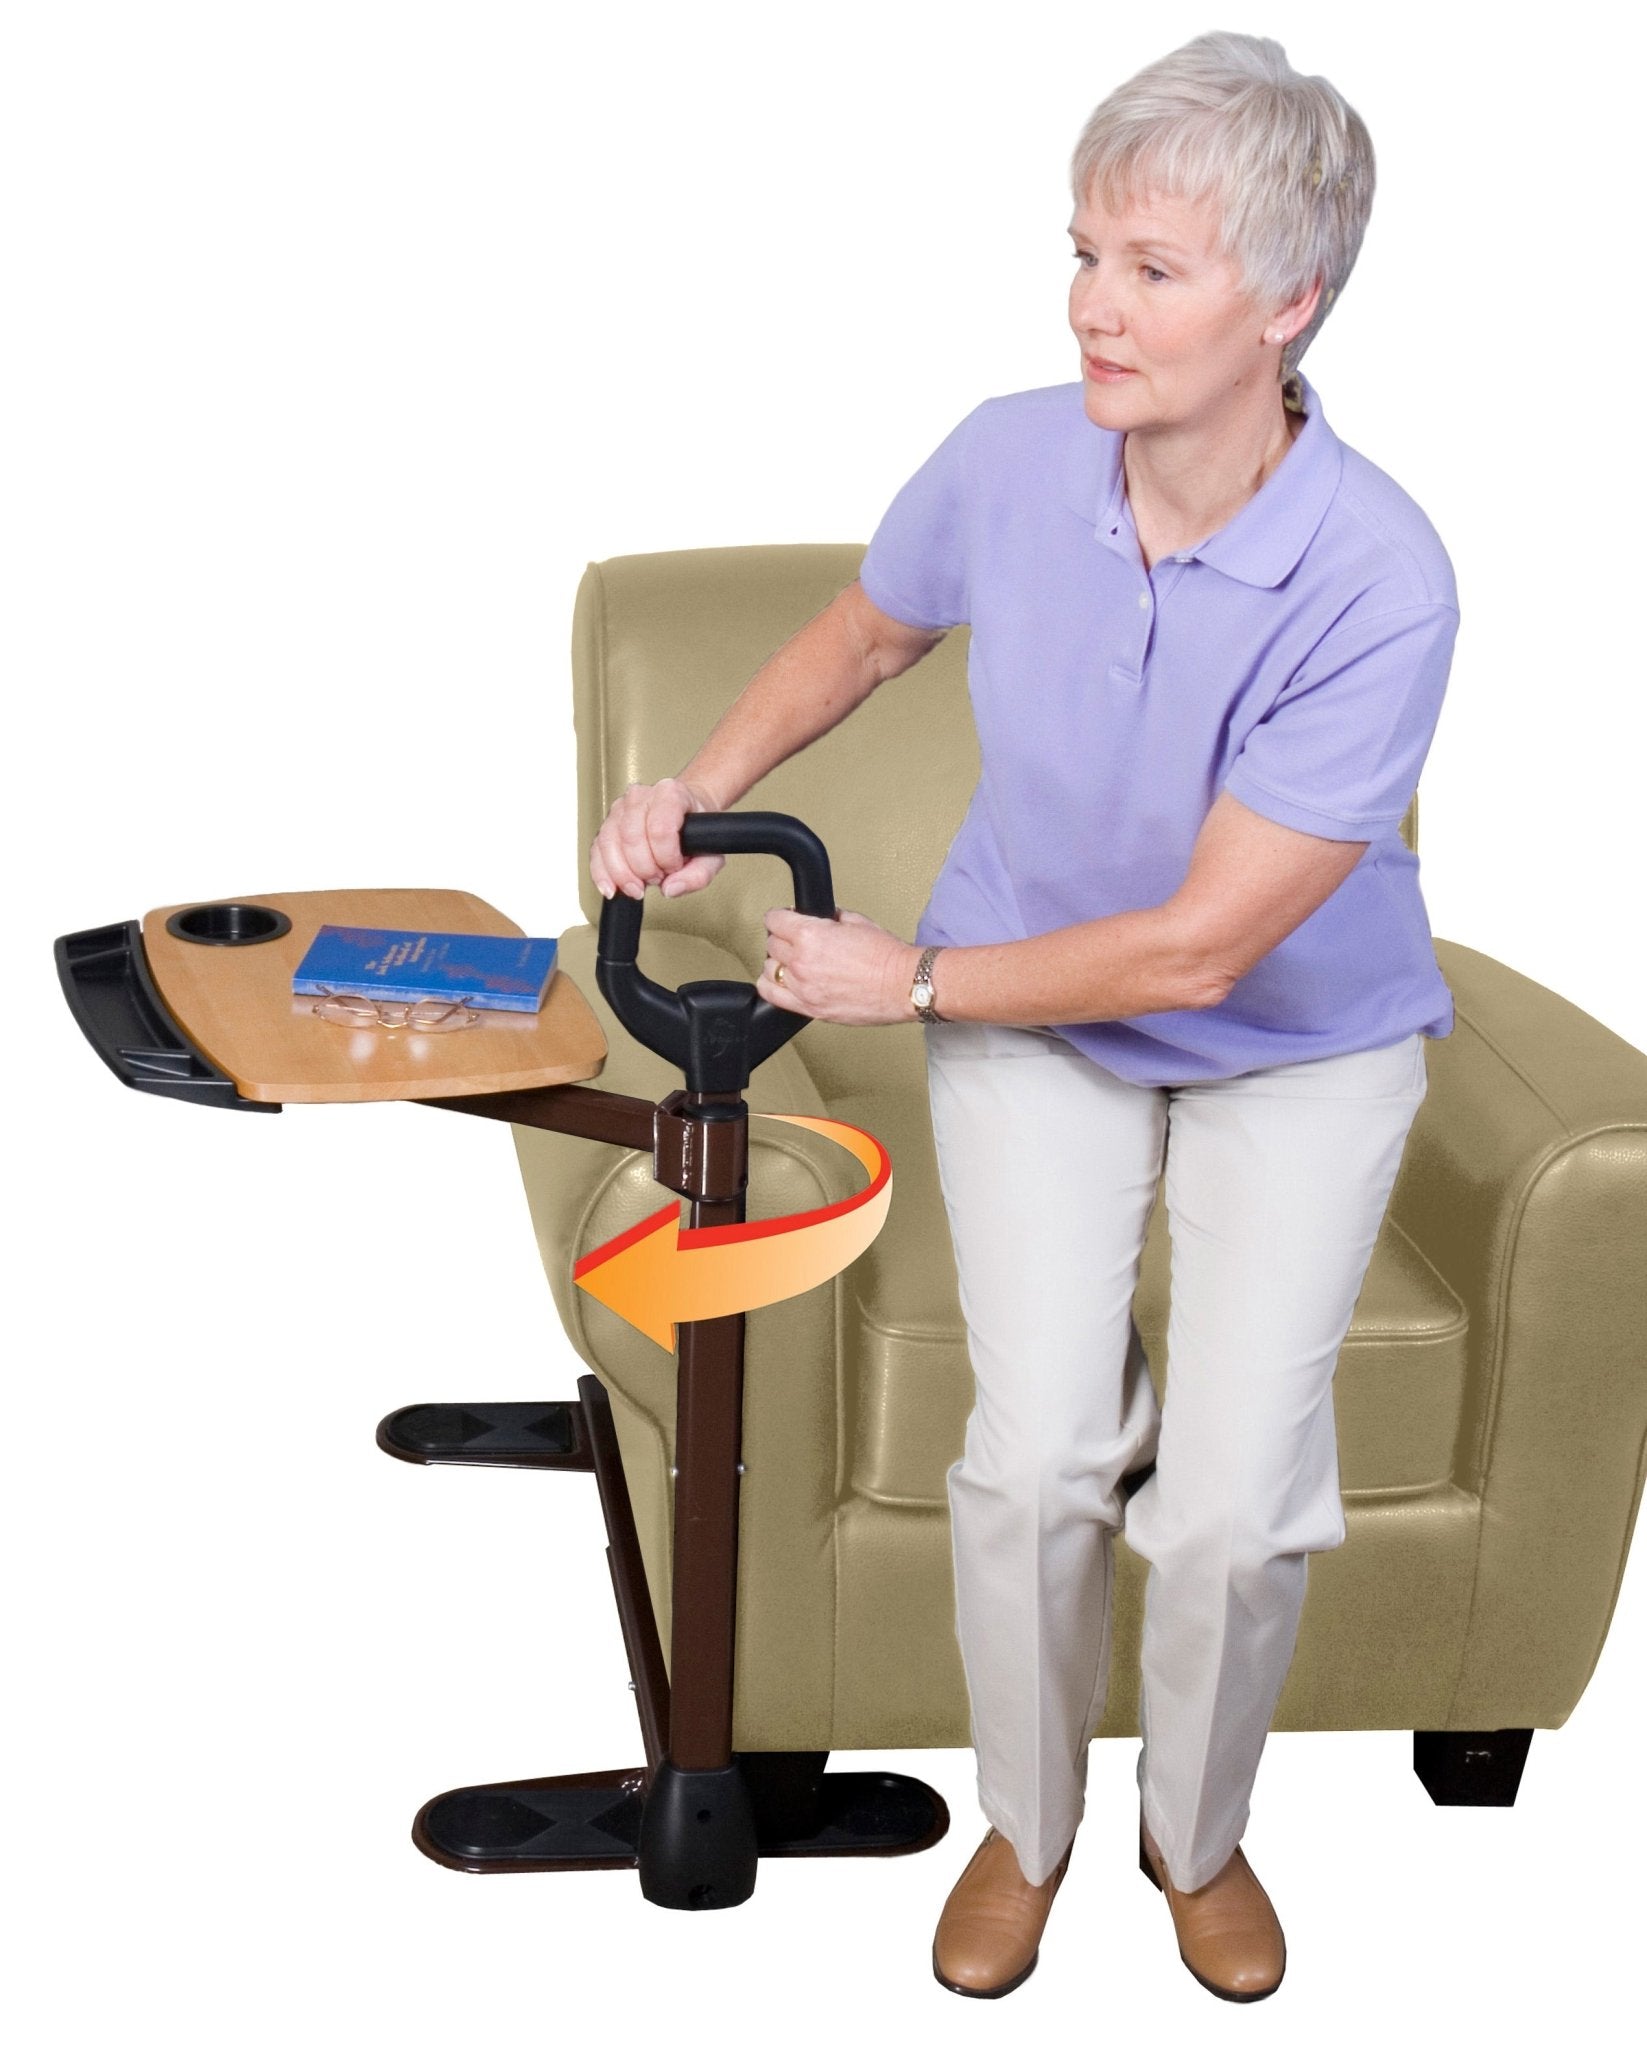 EA/1 - Stander Assist-A-Tray 16" x 18", 26" to 32" Adjustable Height - Best Buy Medical Supplies